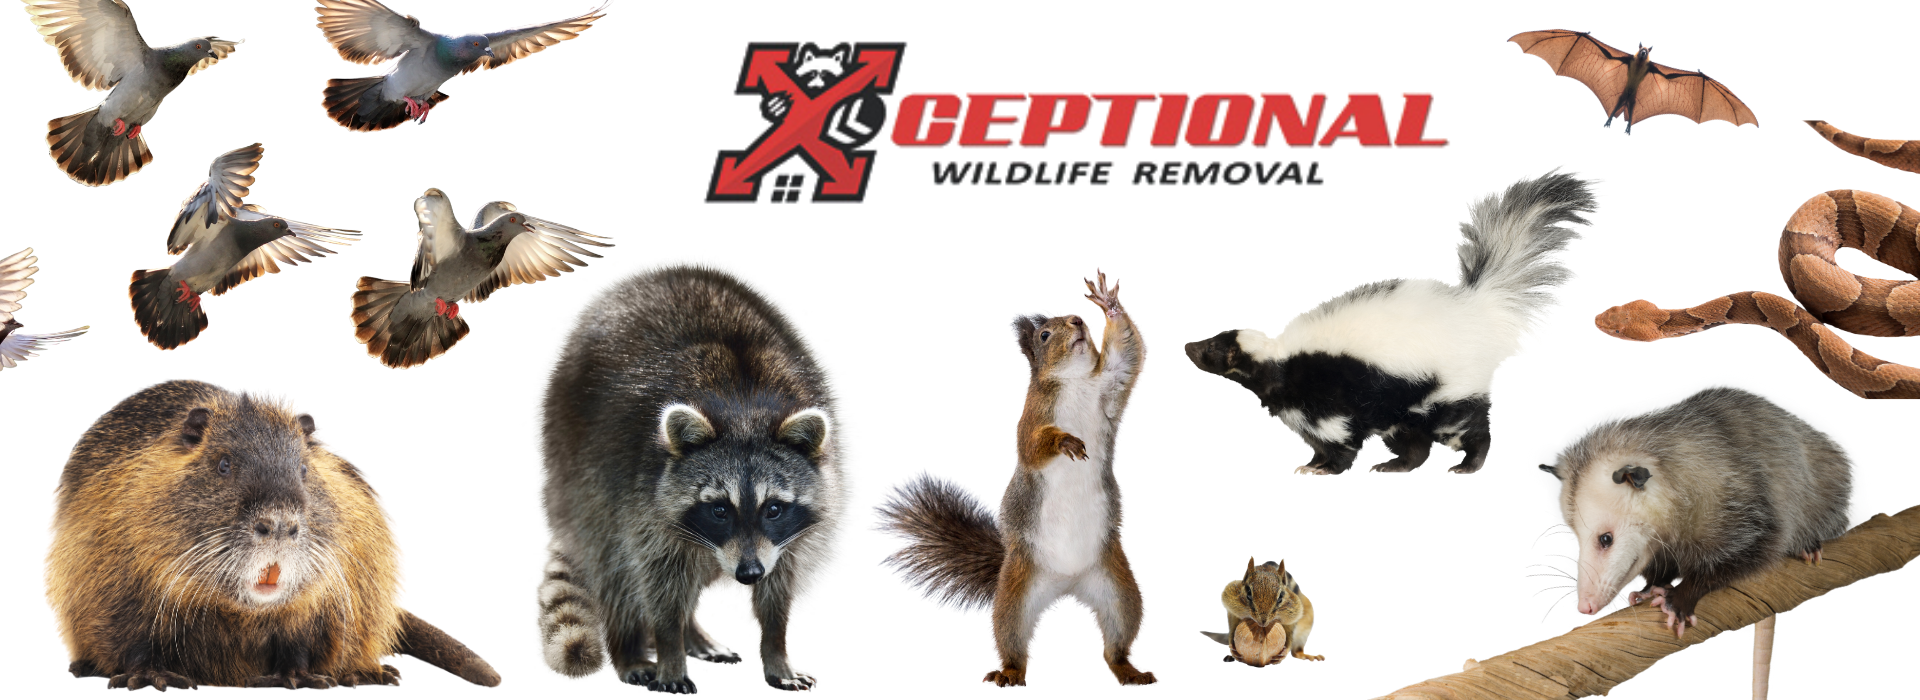 Contact Us Pest Control & Wildlife Removal - Xceptional Wildlife Removal